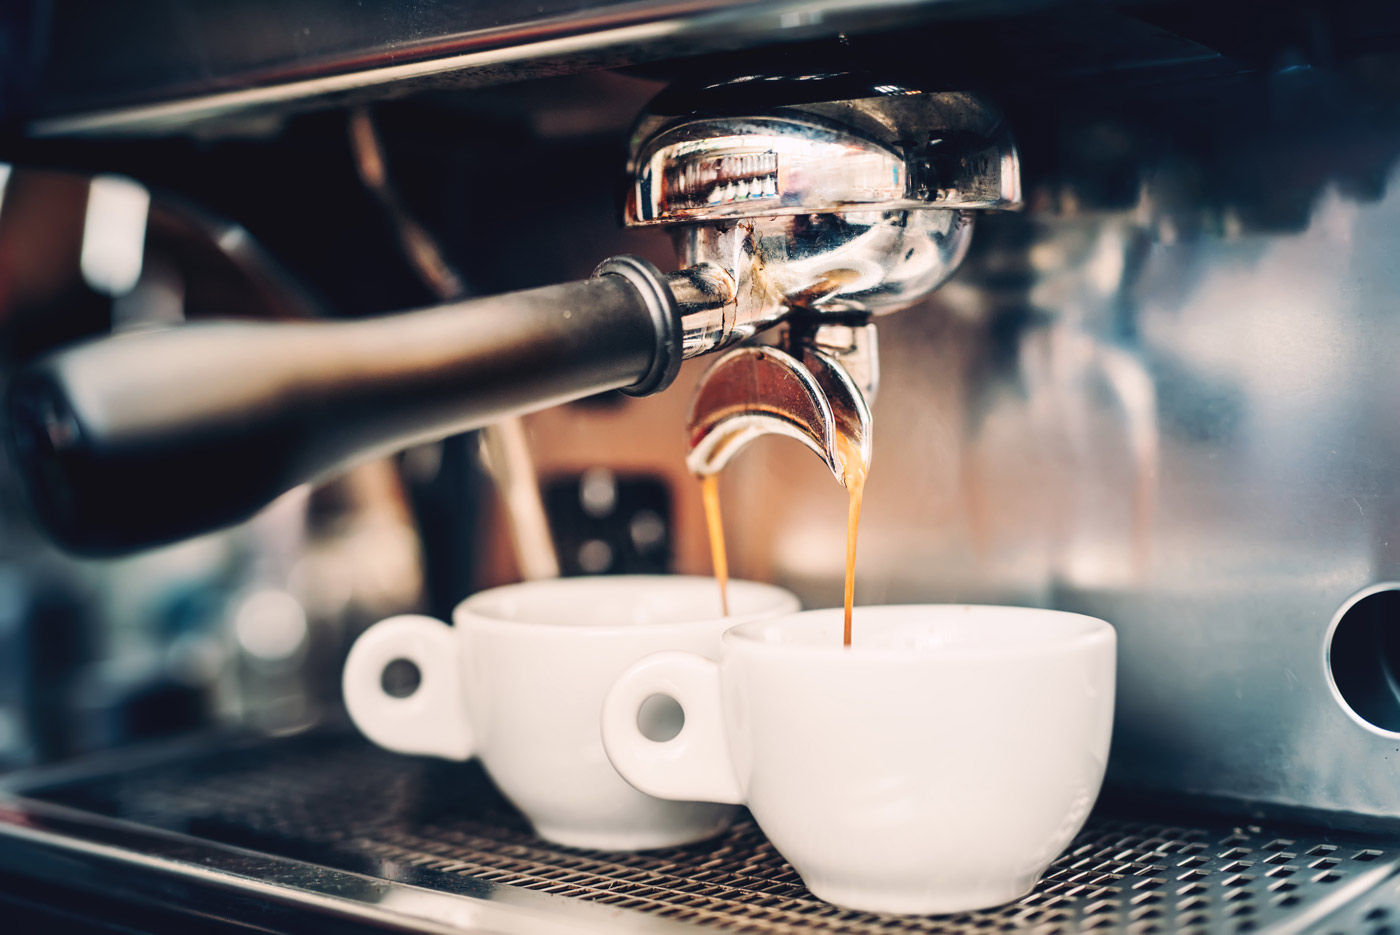 Enjoy an espresso or two at one of these excellent coffee shops near the Comfort Suites Kelowna hotel.